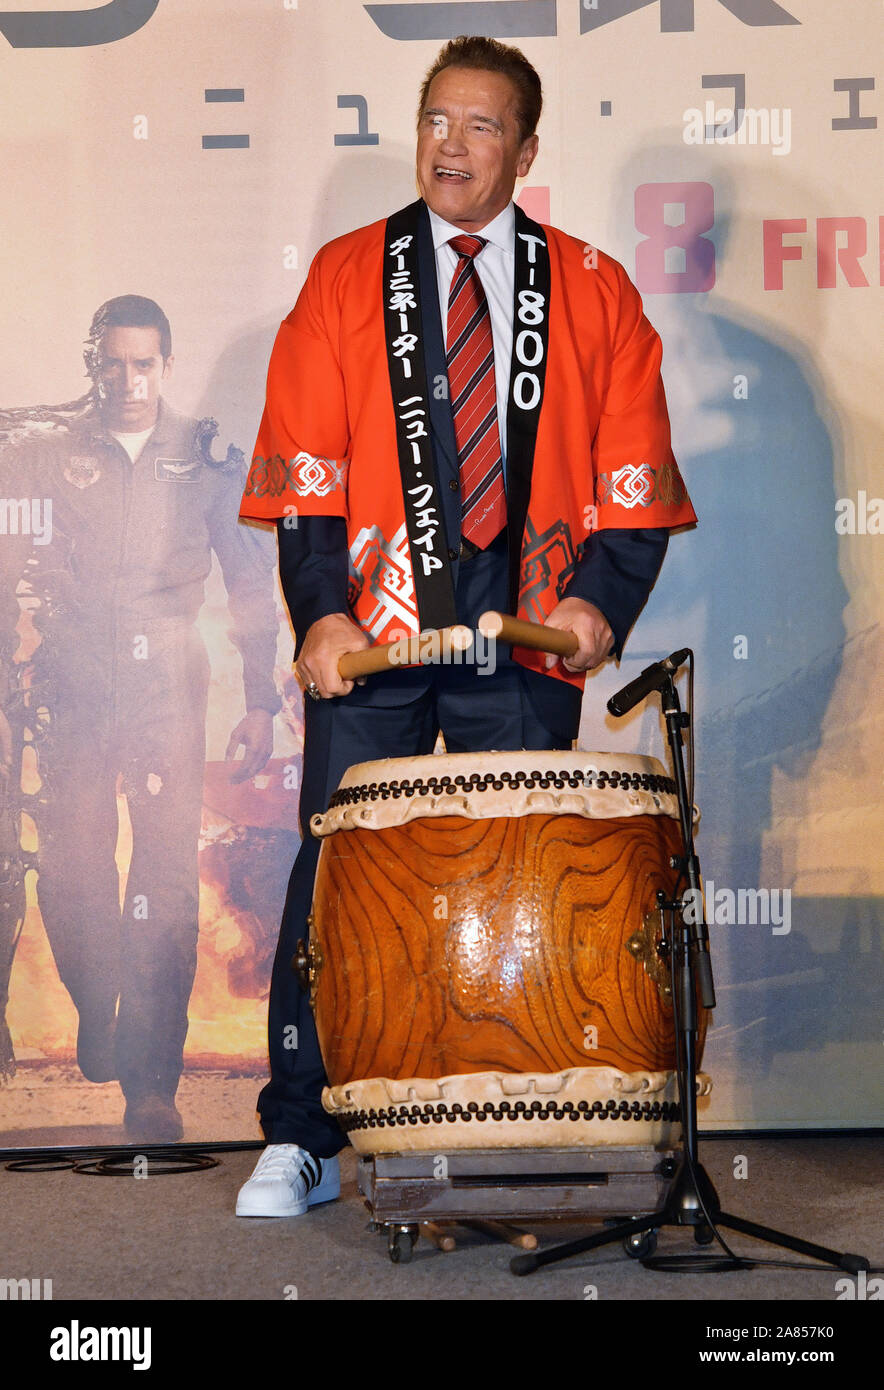 tokyo-japan-06th-nov-2019-actor-arnold-schwarzenegger-plays-japanese-drumtaiko-during-the-japan-premiere-for-the-film-terminator-dark-fate-in-tokyo-japan-on-wednesday-november-6-2019-hamilton-and-schwarzenegger-attend-both-together-at-event-in-japan-first-time-this-film-open-november-8-in-japan-photo-by-mori-keizoupi-credit-upialamy-live-news-2A857K0.jpg